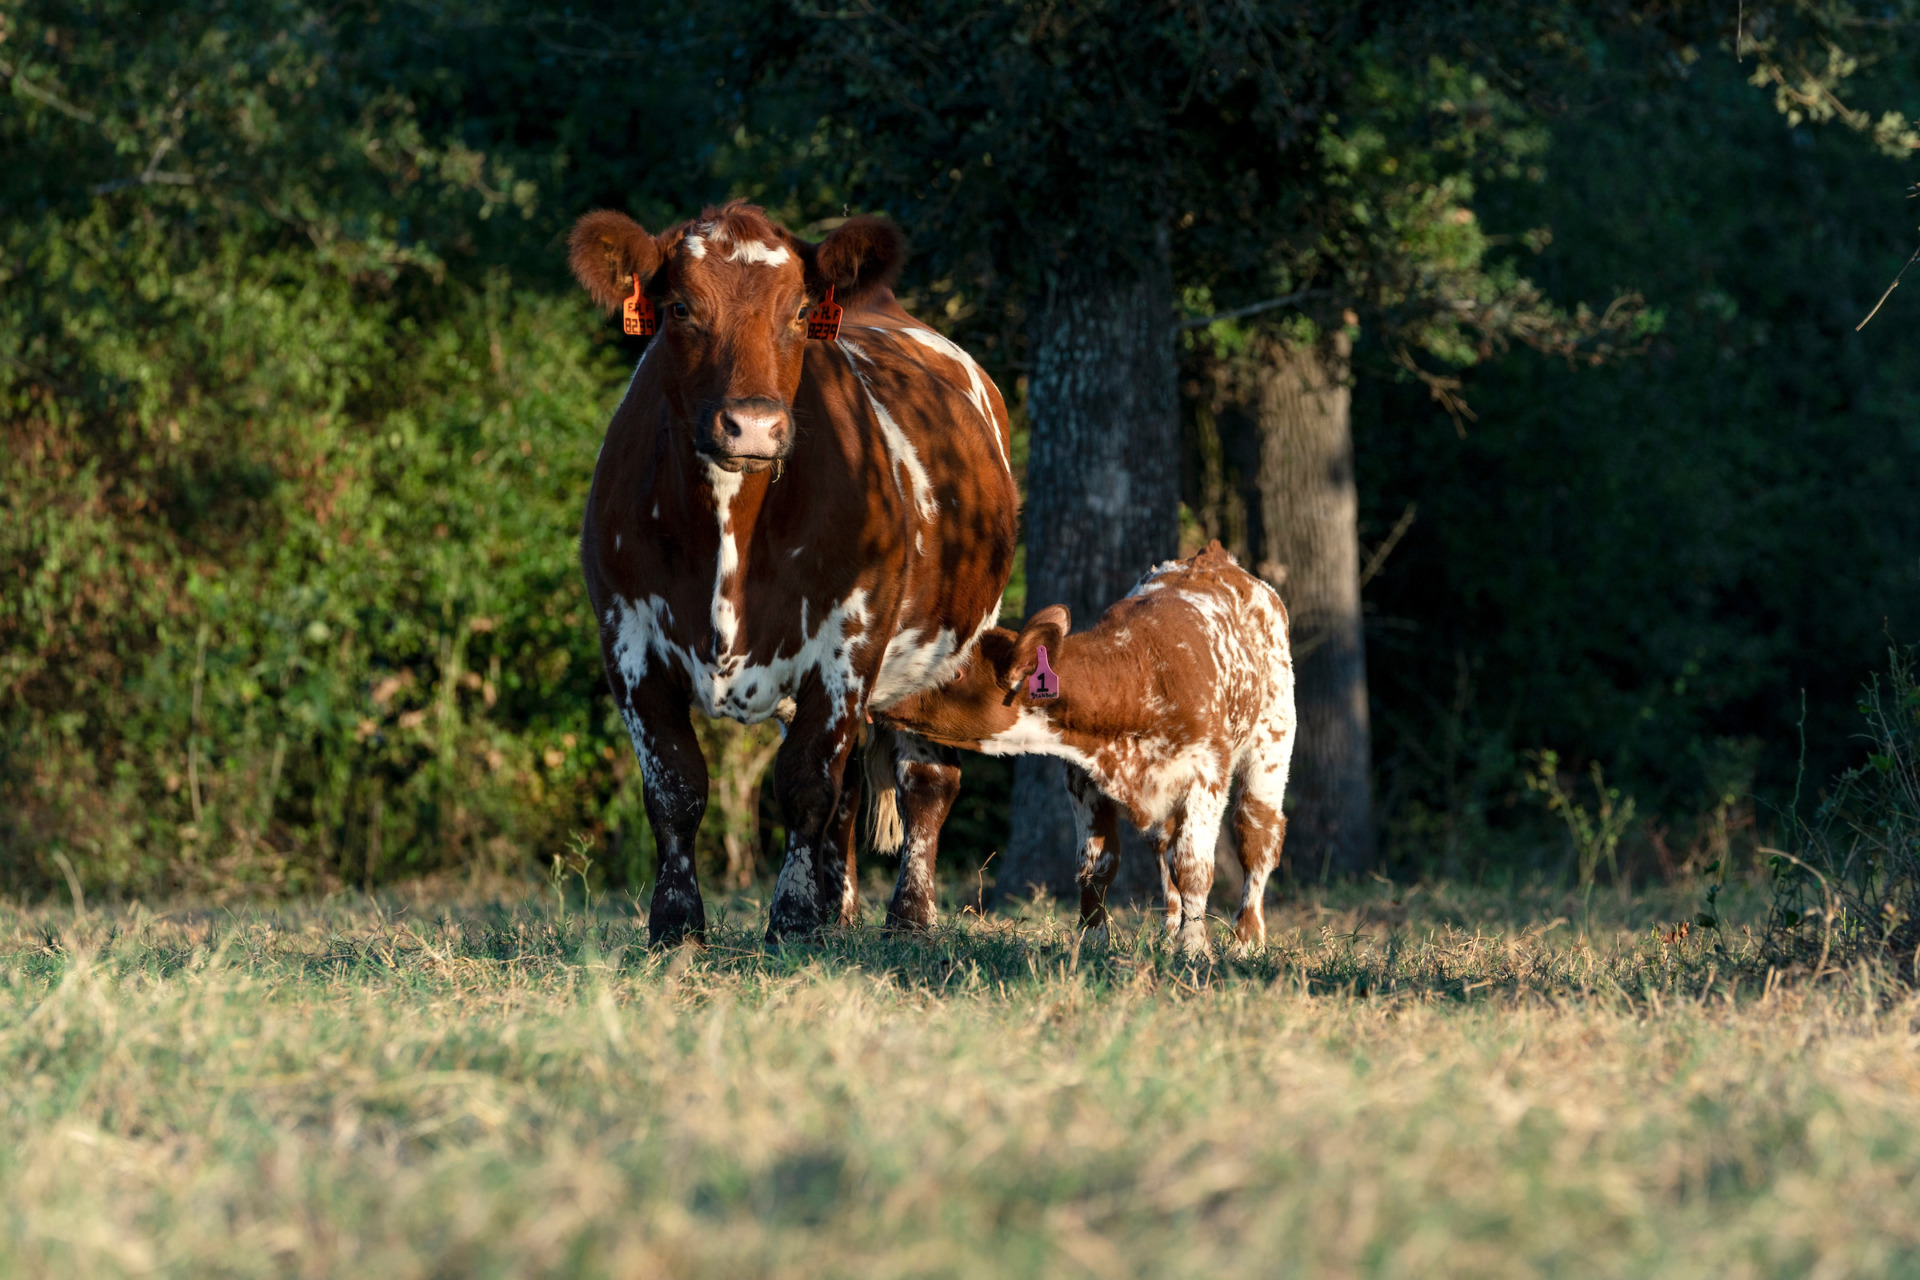 Beef reproductive management conference Aug. 30-31 in San Antonio